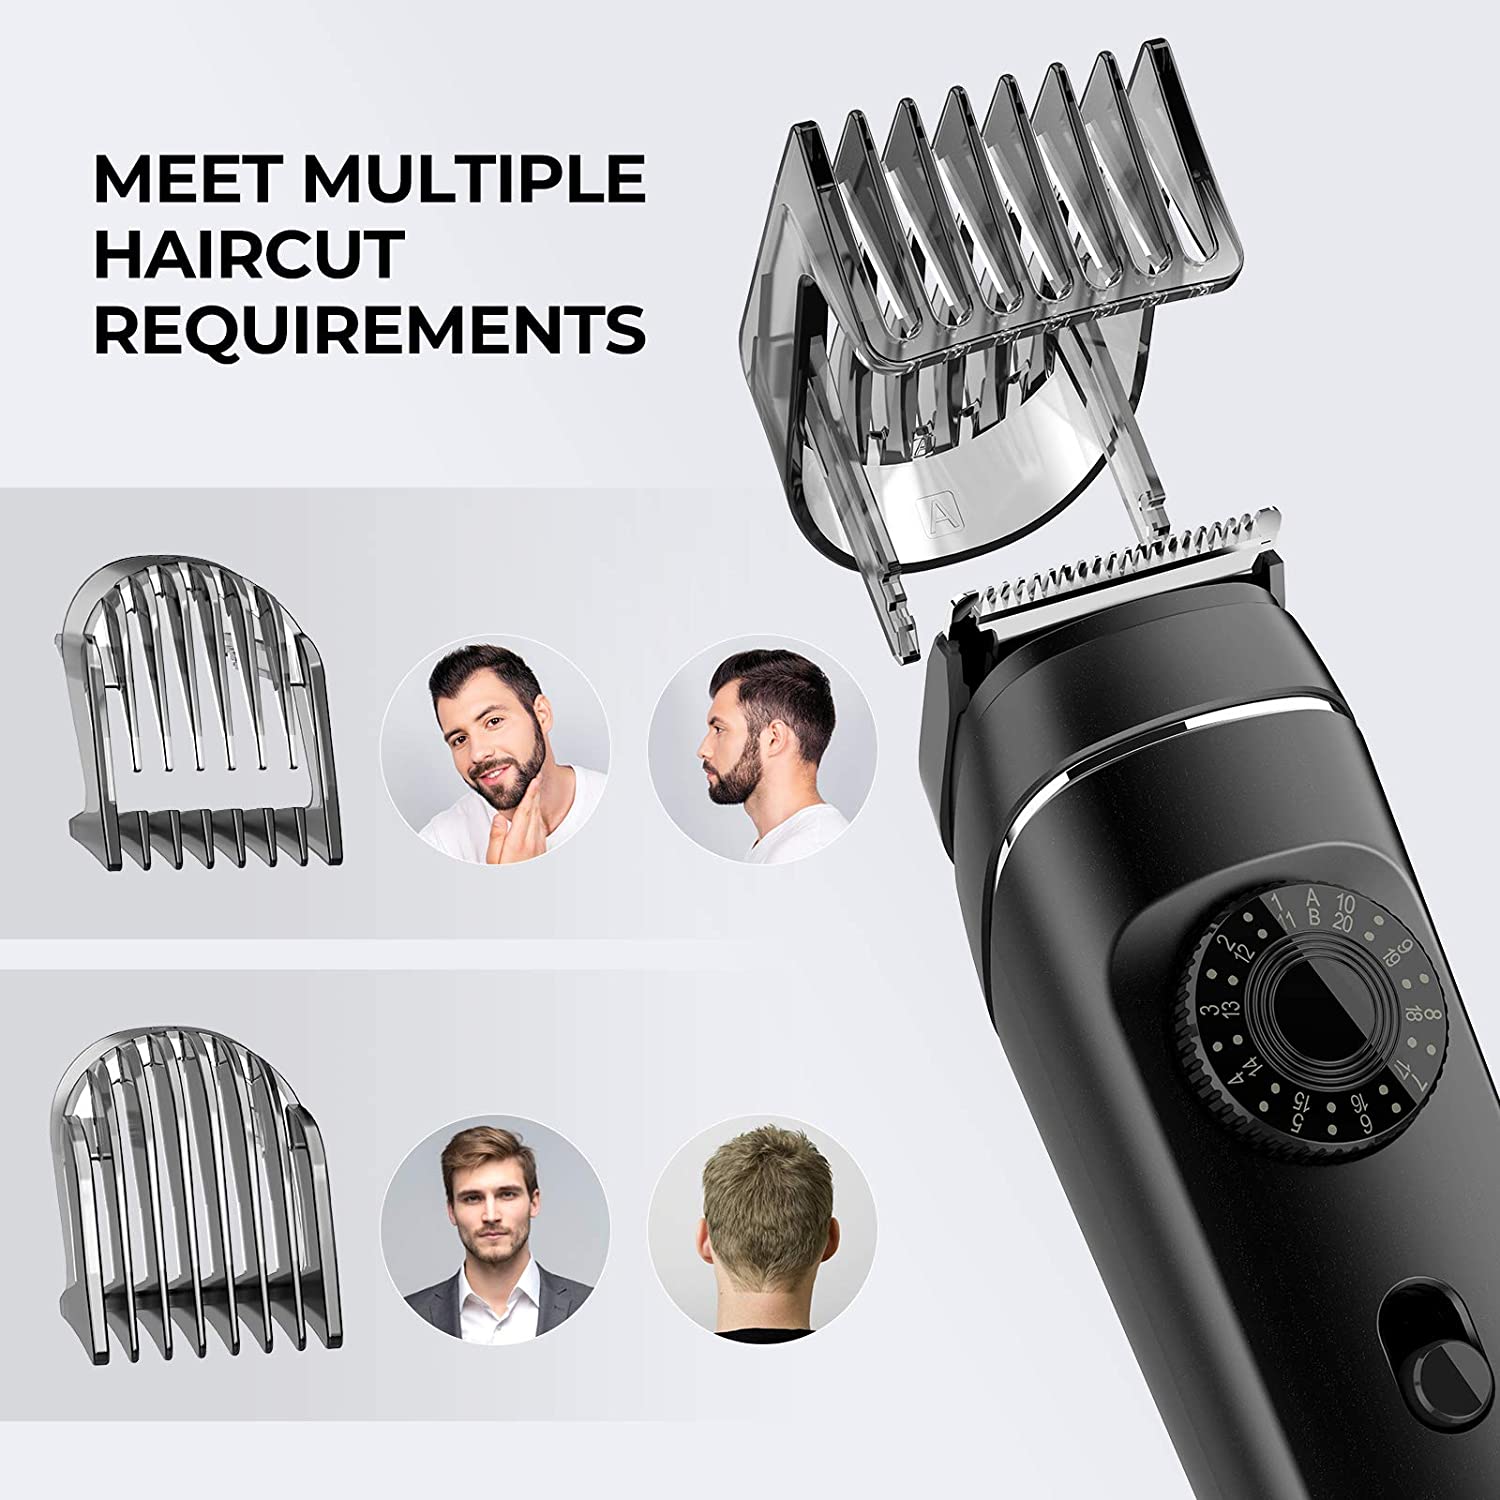 How To Cut Your Hair With An Electric Hair Clipper? - GroupWholesalers